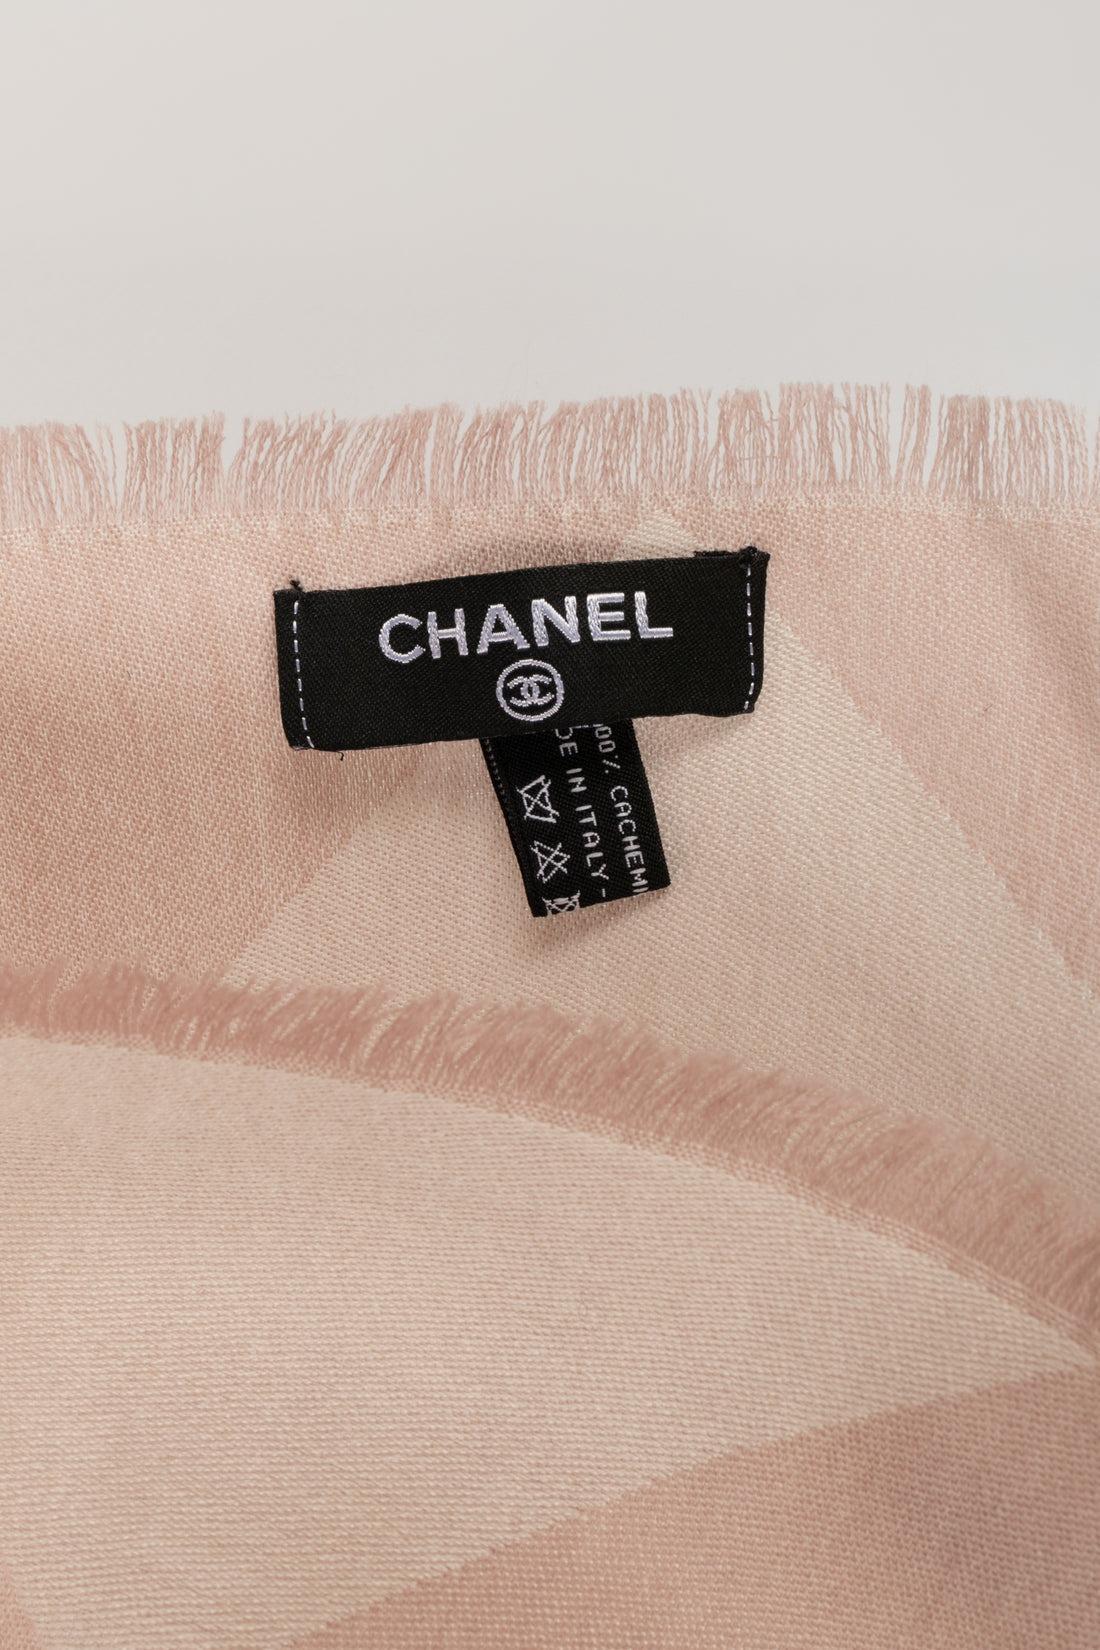 Chanel Cashmere Stole in Pink Tones For Sale 2